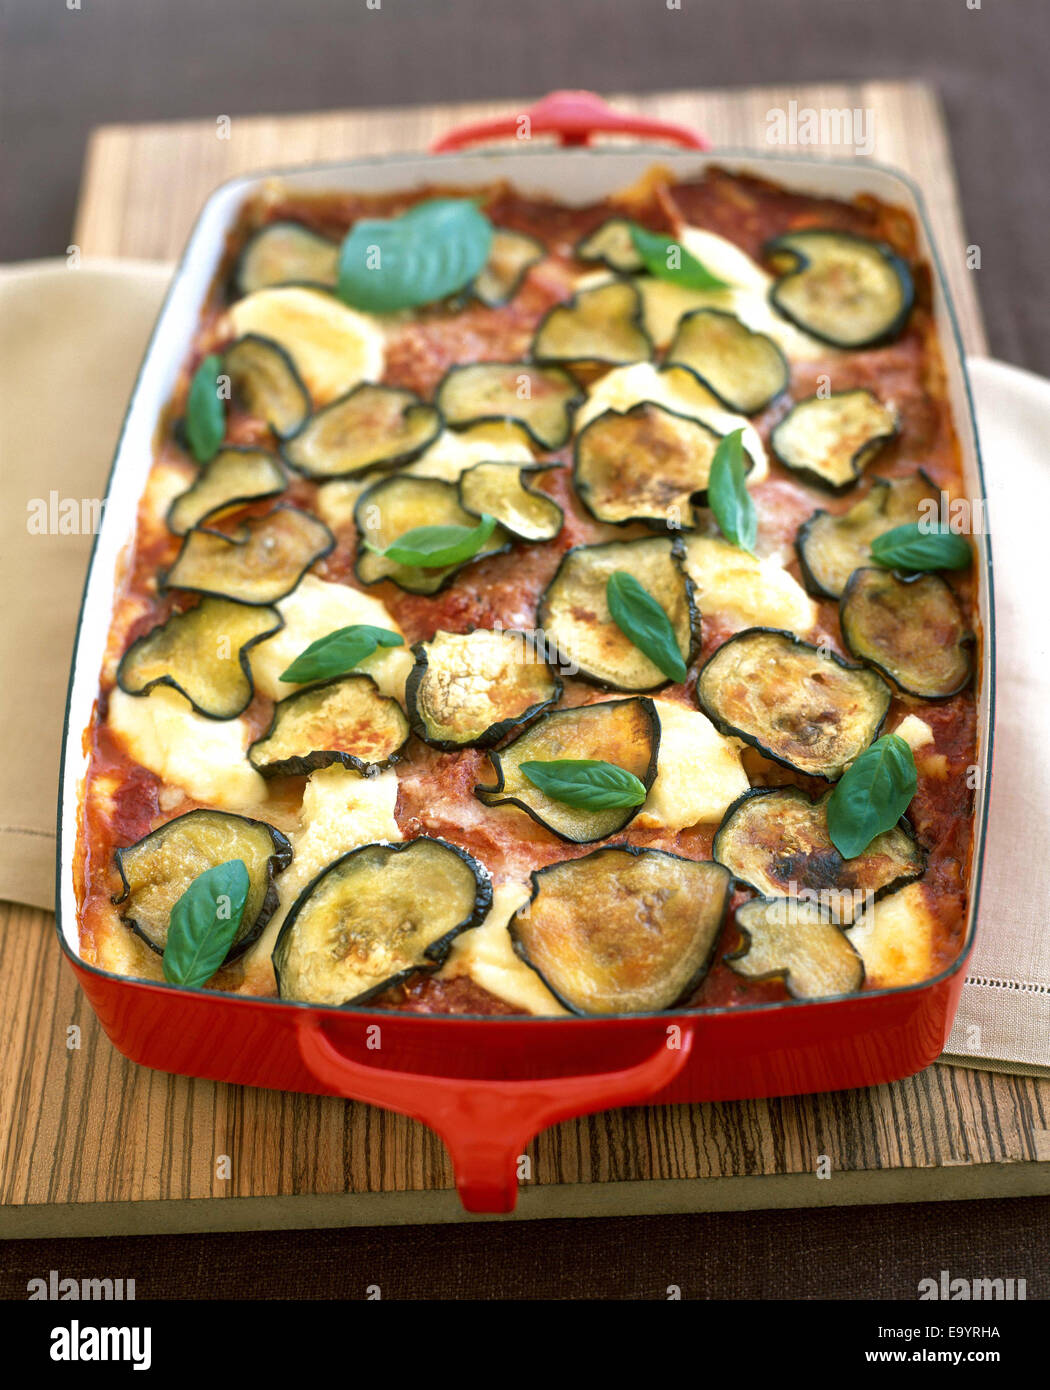 baked lasagna in red pan with eggplant slices and basil leaves Stock Photo